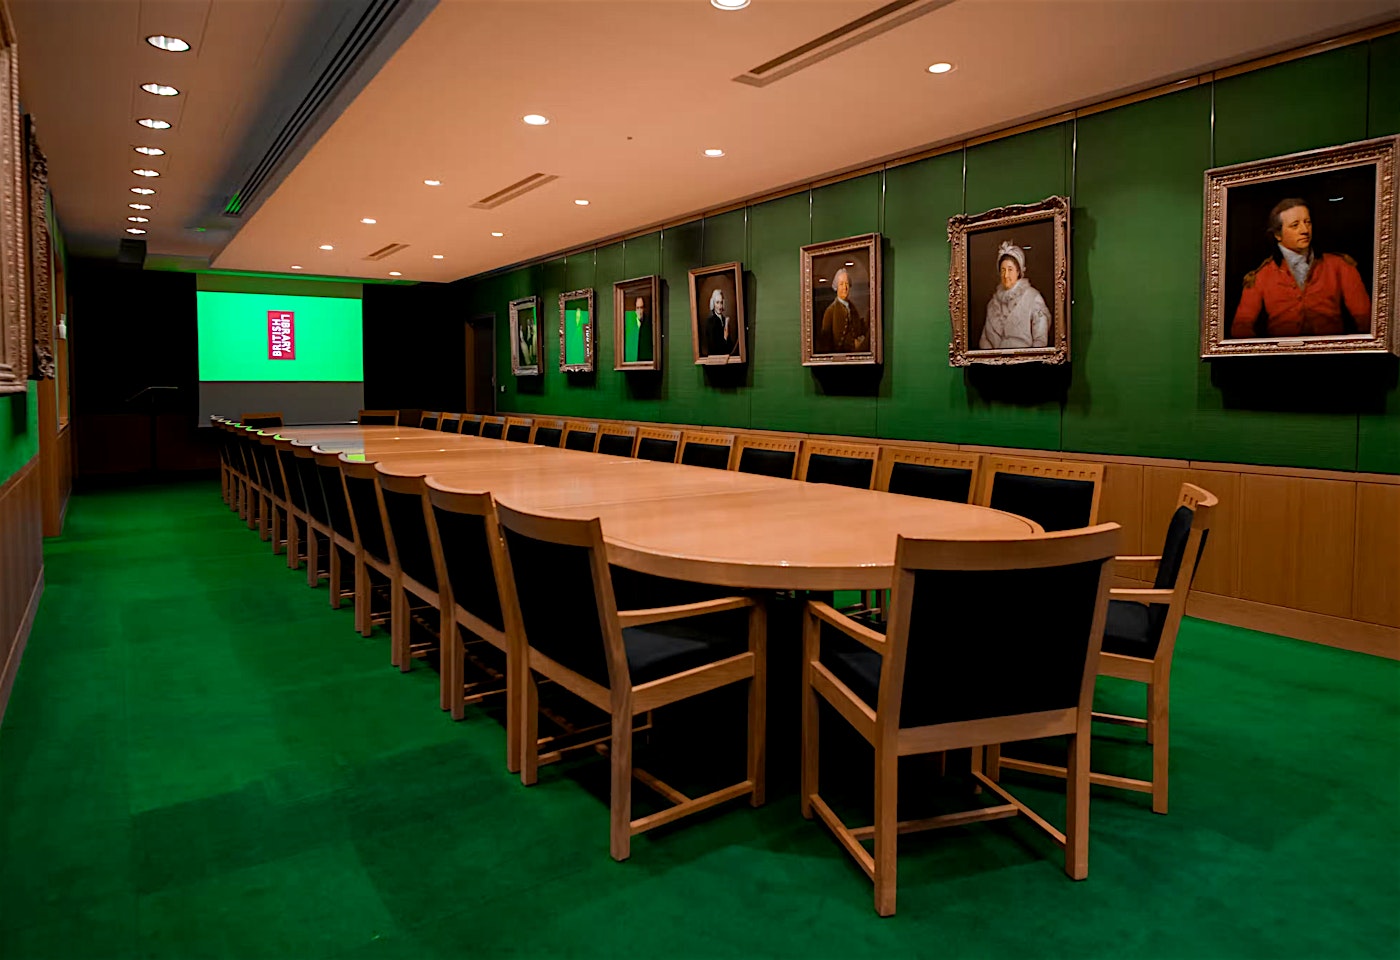 A boardroom style meeting room in the British Library